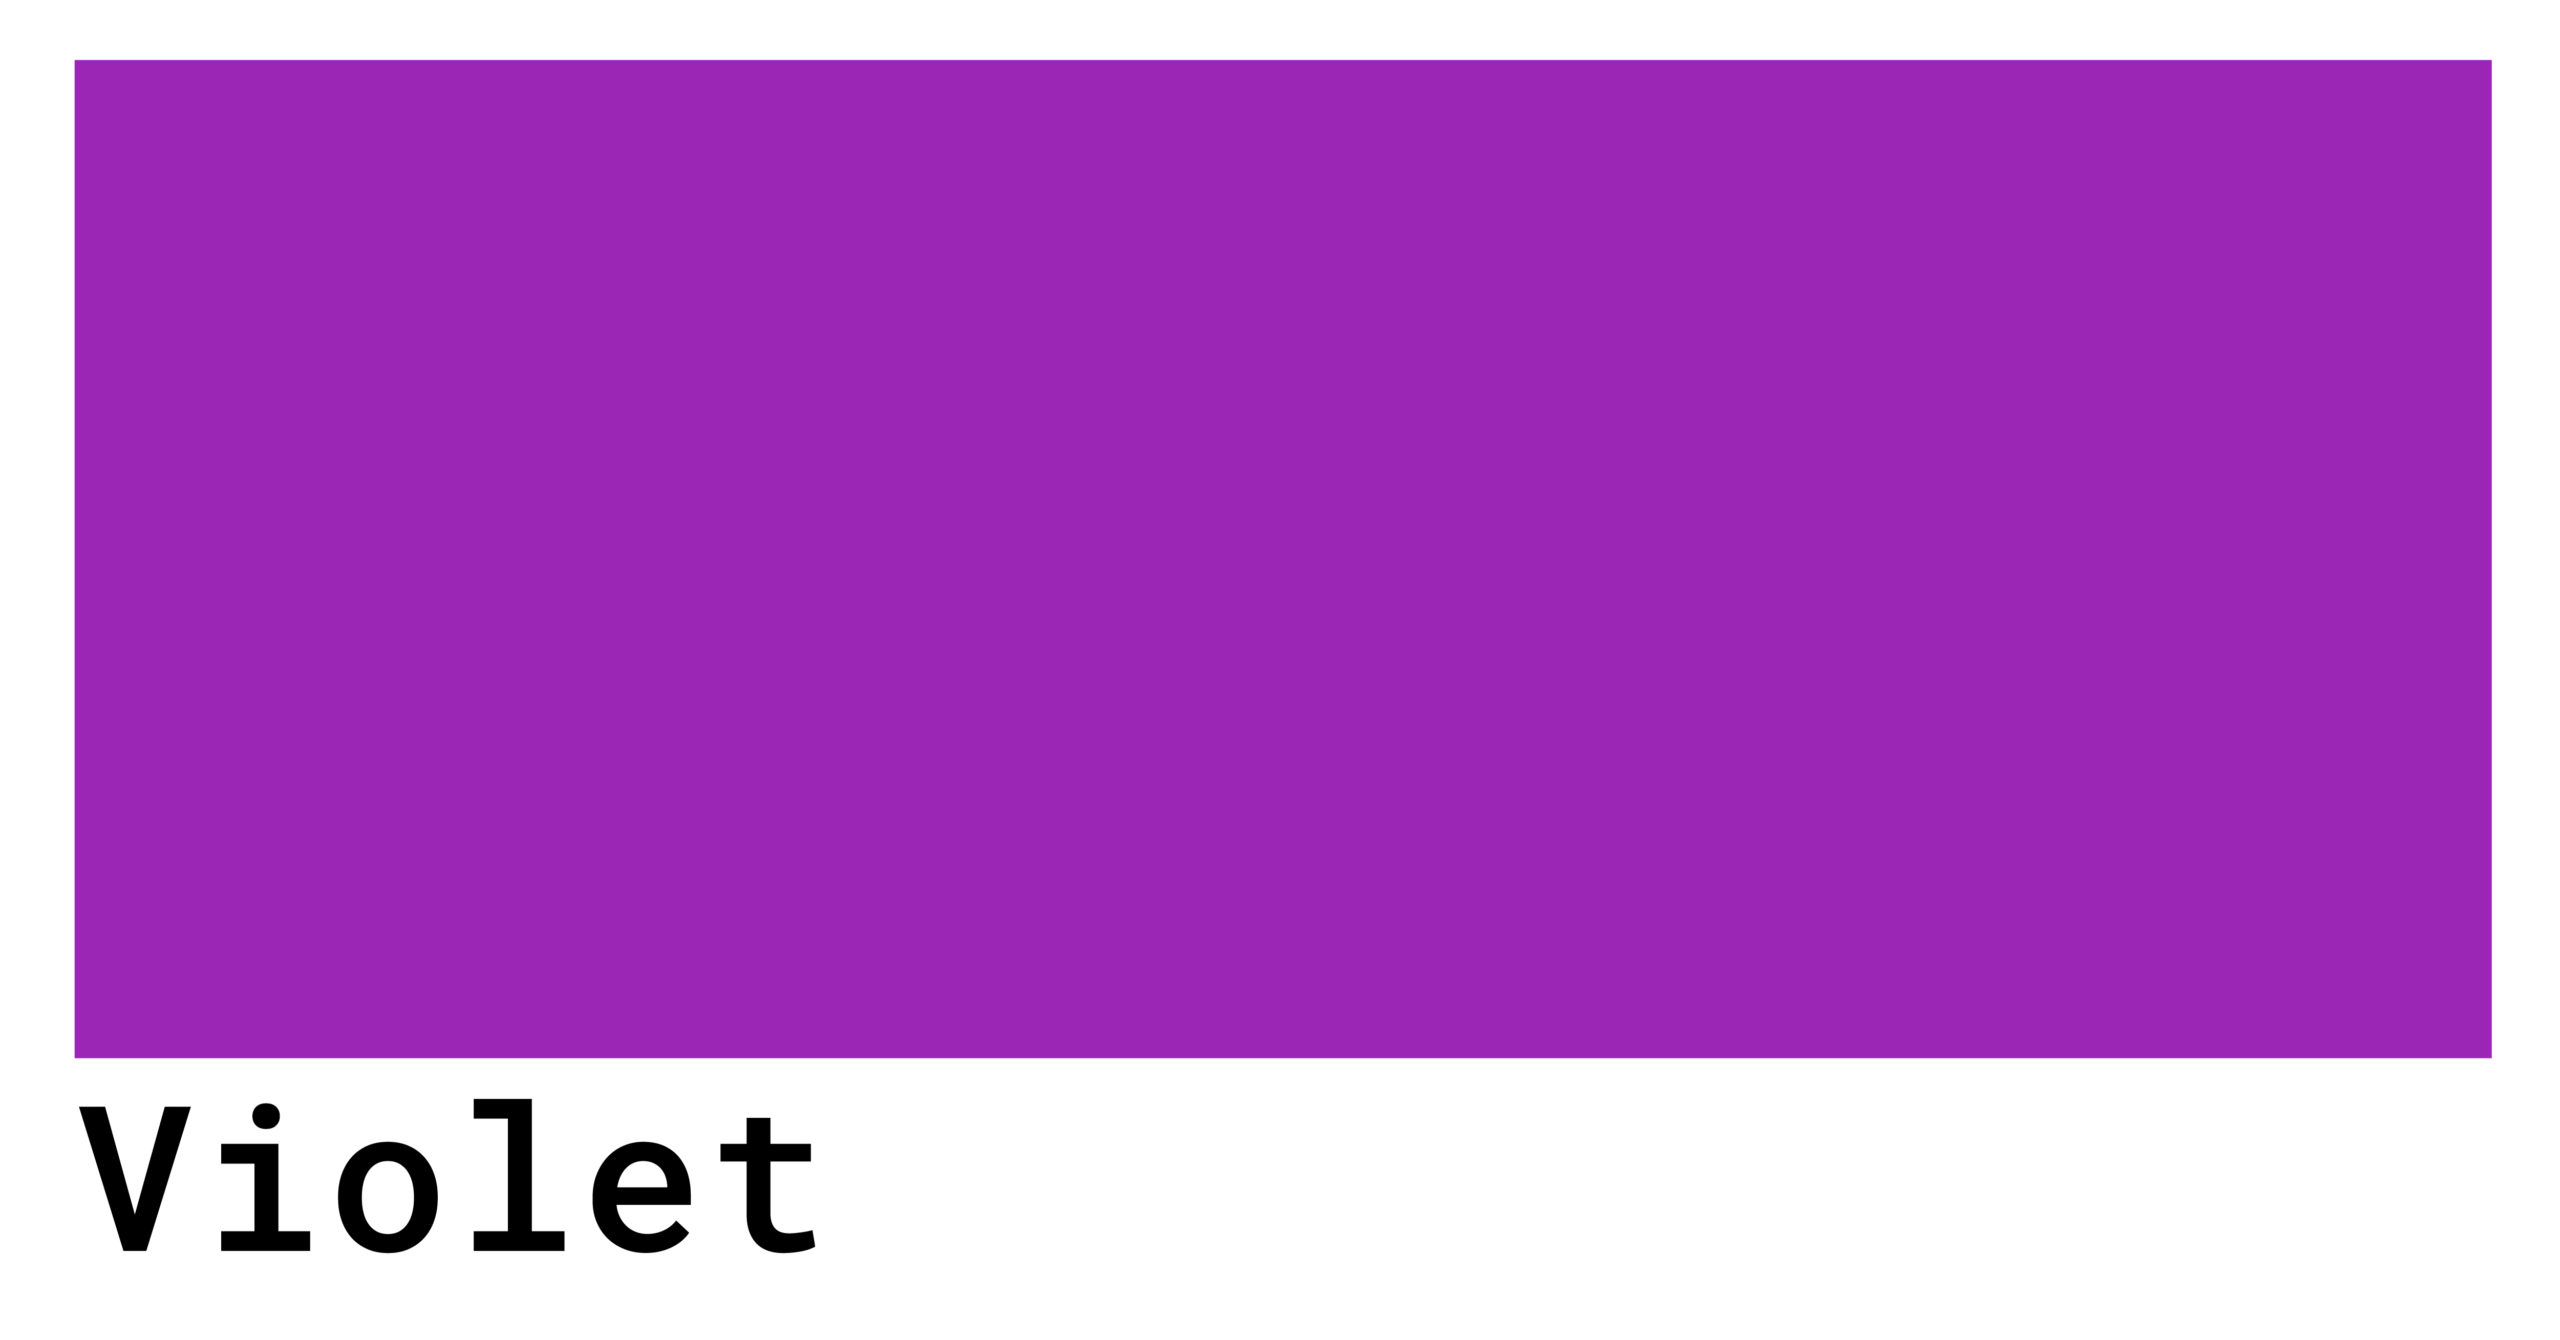 violet purple color swatch scaled